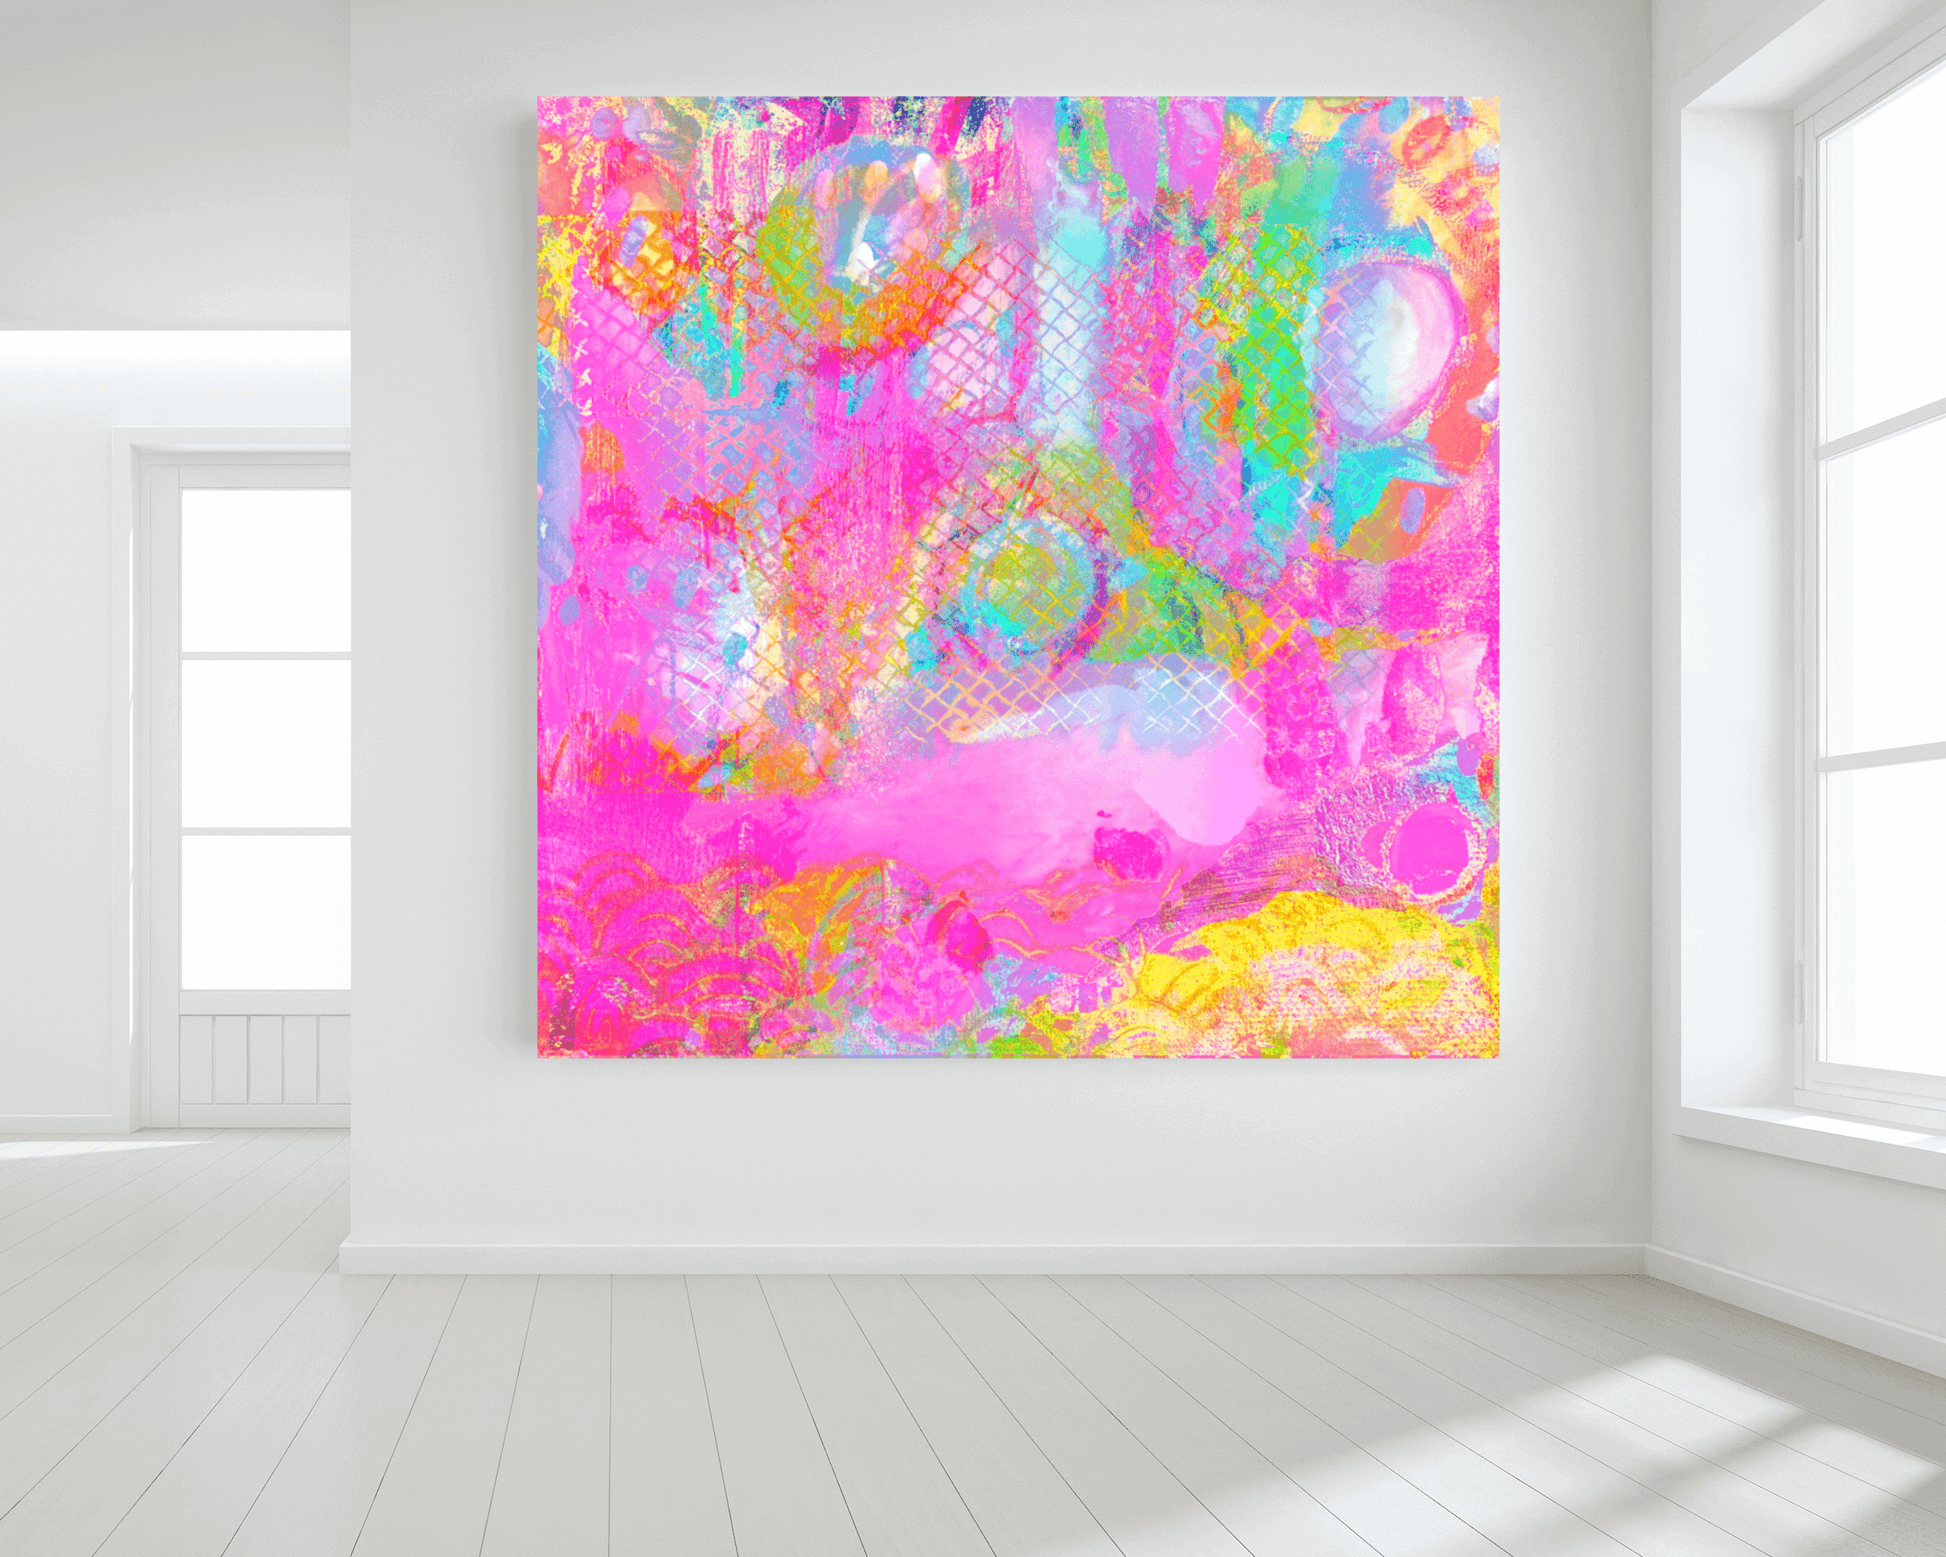 Drippy Pink “Candyland” Abstract Art Canvas Print Wall Art Large Canvas on Wall